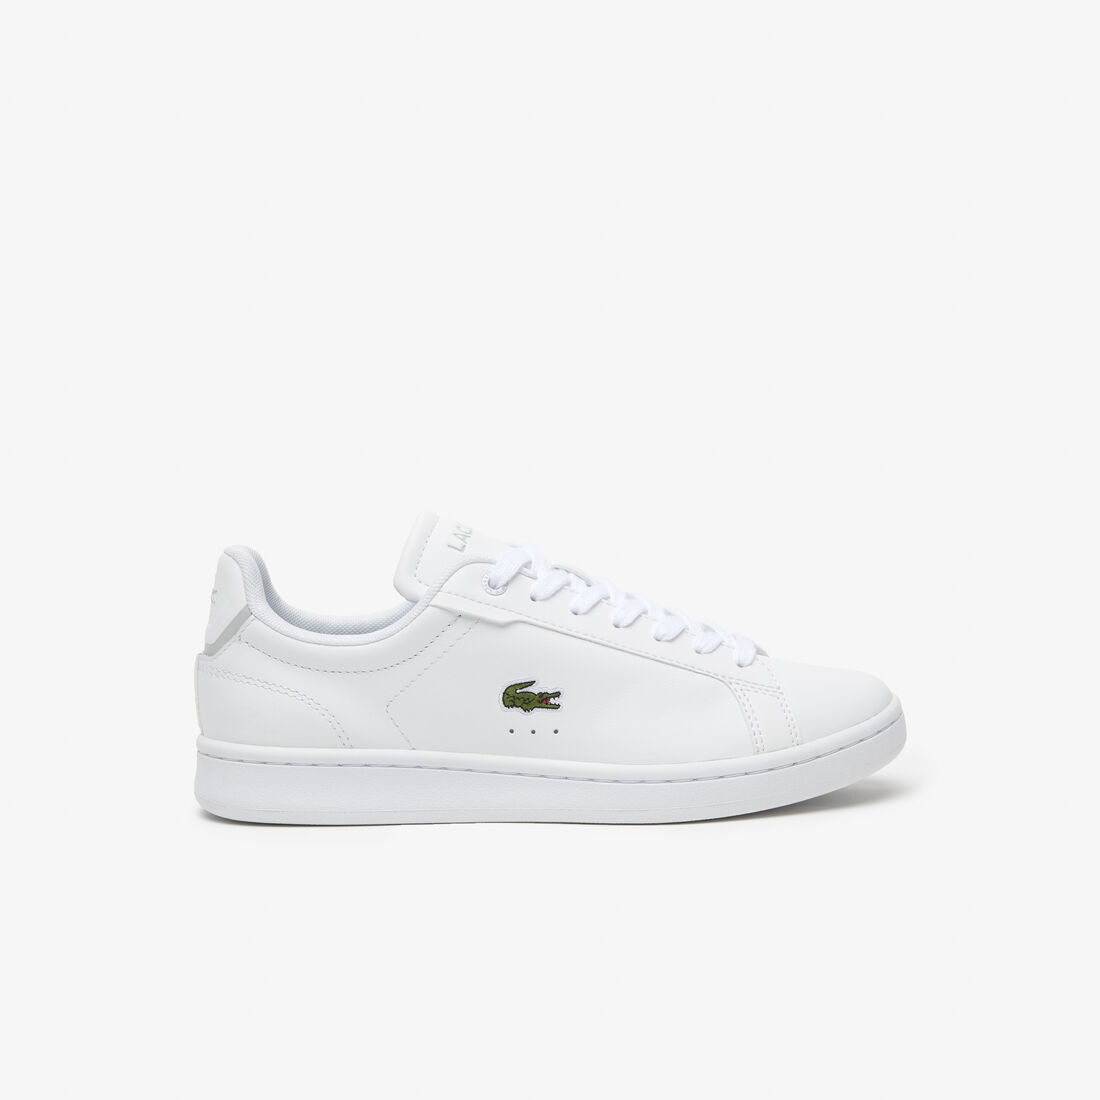 Women's Lacoste Carnaby Pro BL Tonal Leather Trainers - 45SFA0083-21G